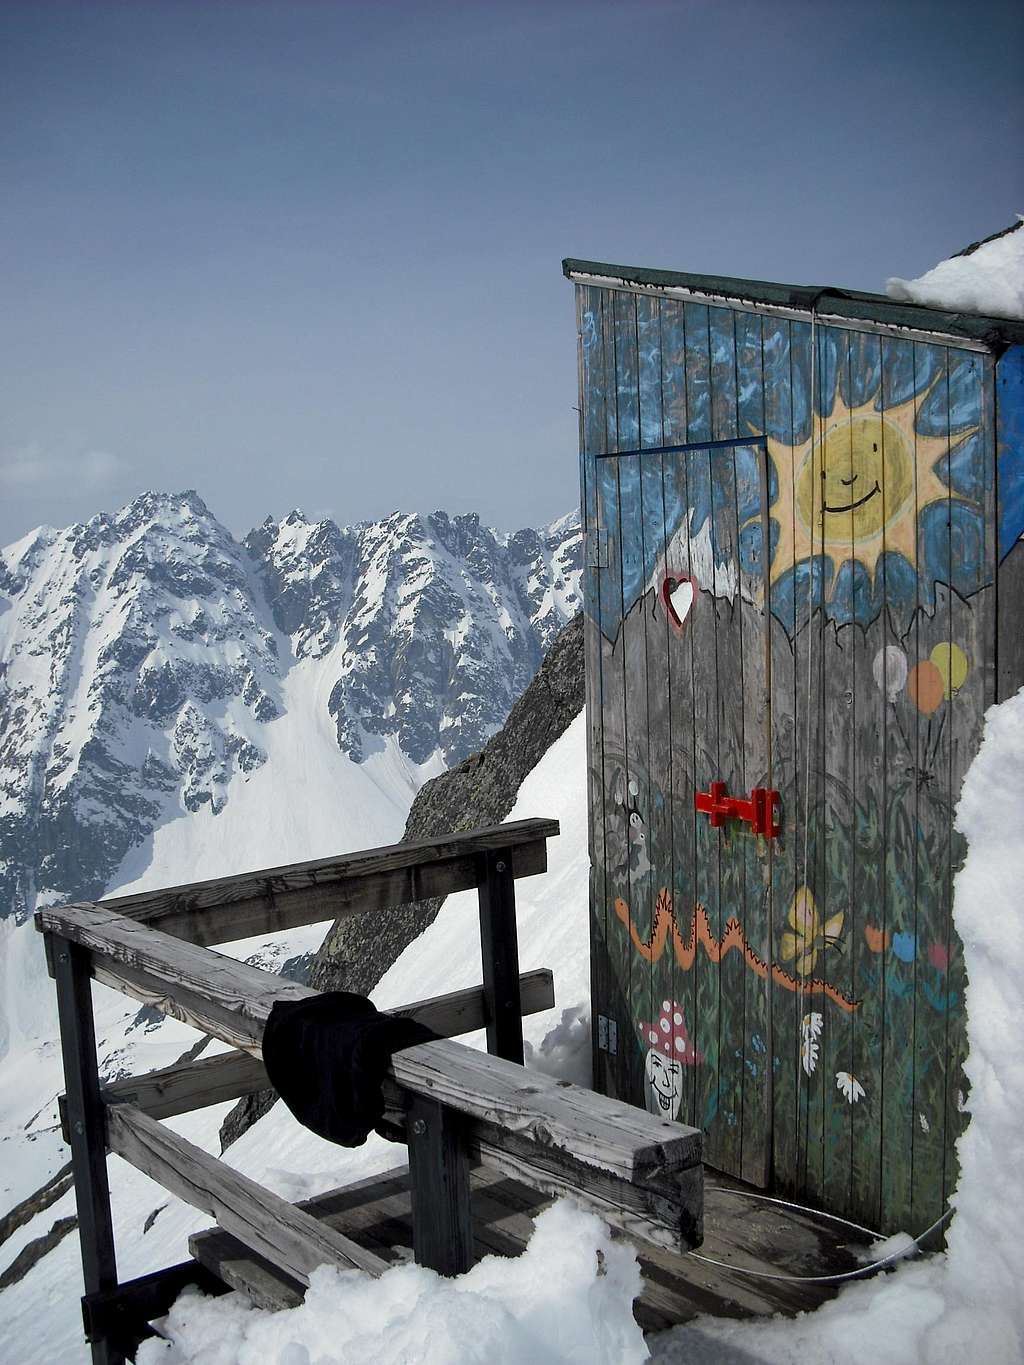 The best toilet in Tatra Mountains